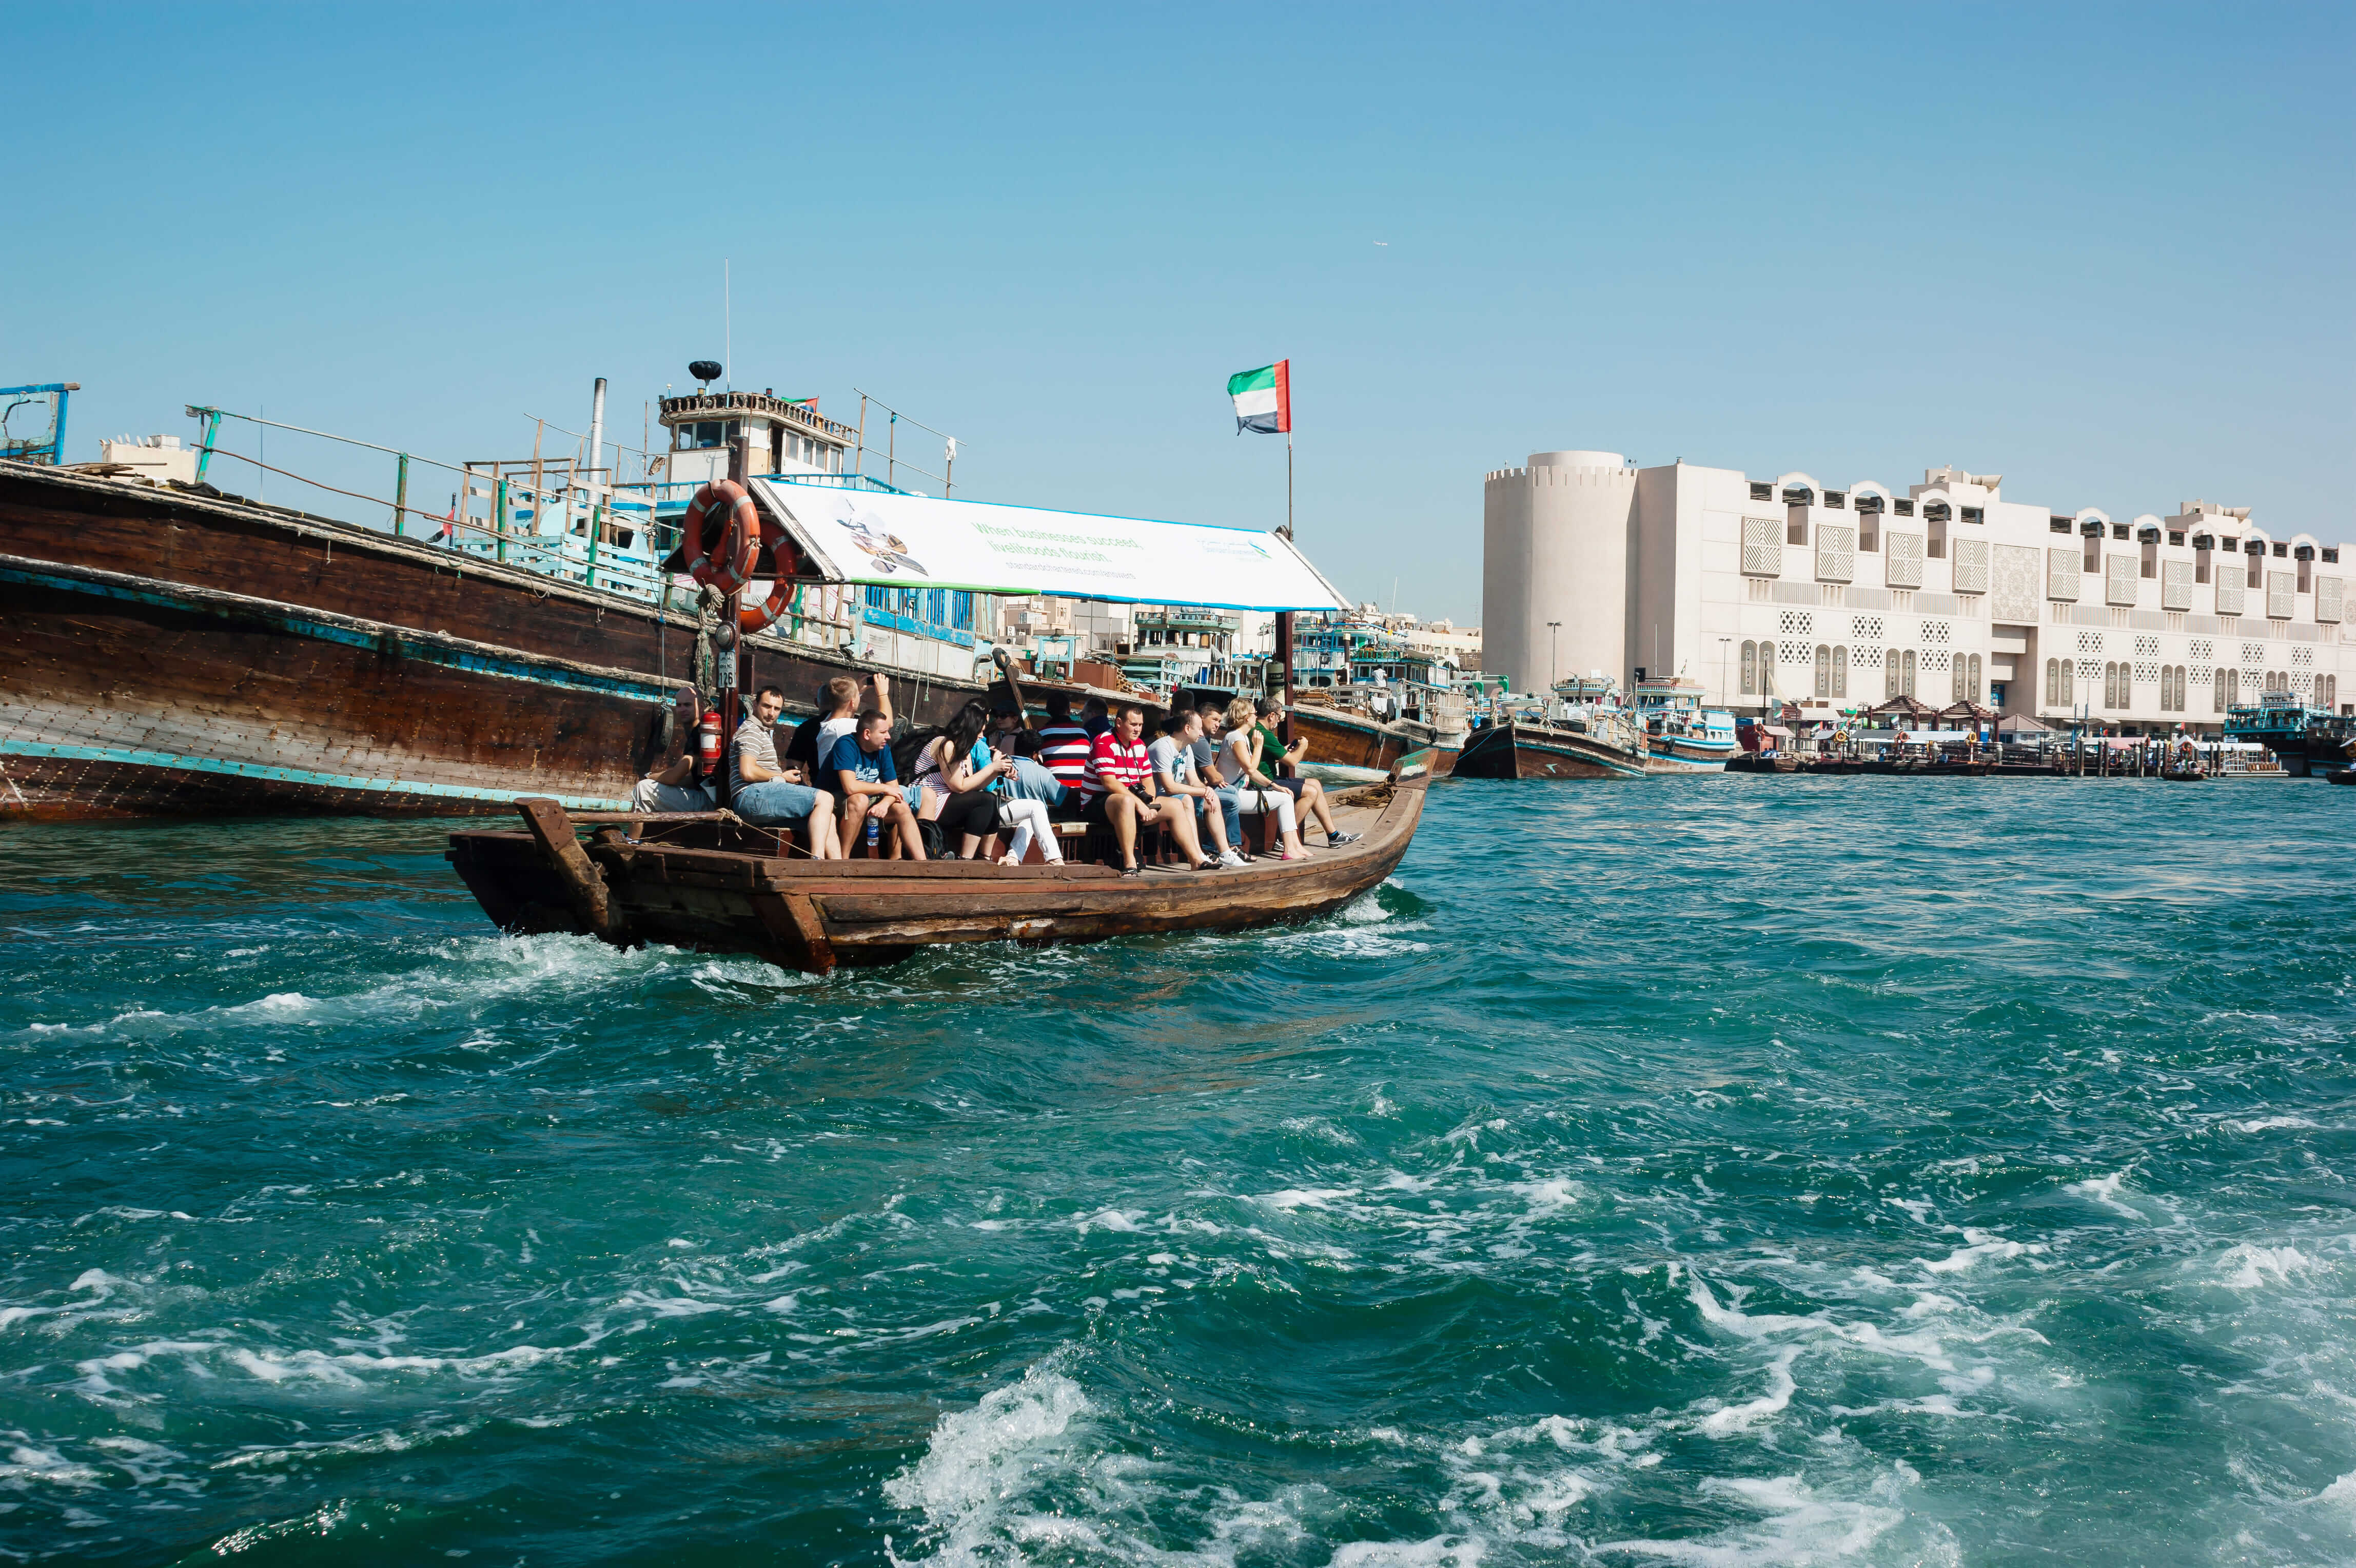 Photography Tour- Explore Picturesque Landscapes Of Old And Modern Dubai - Travel Fube